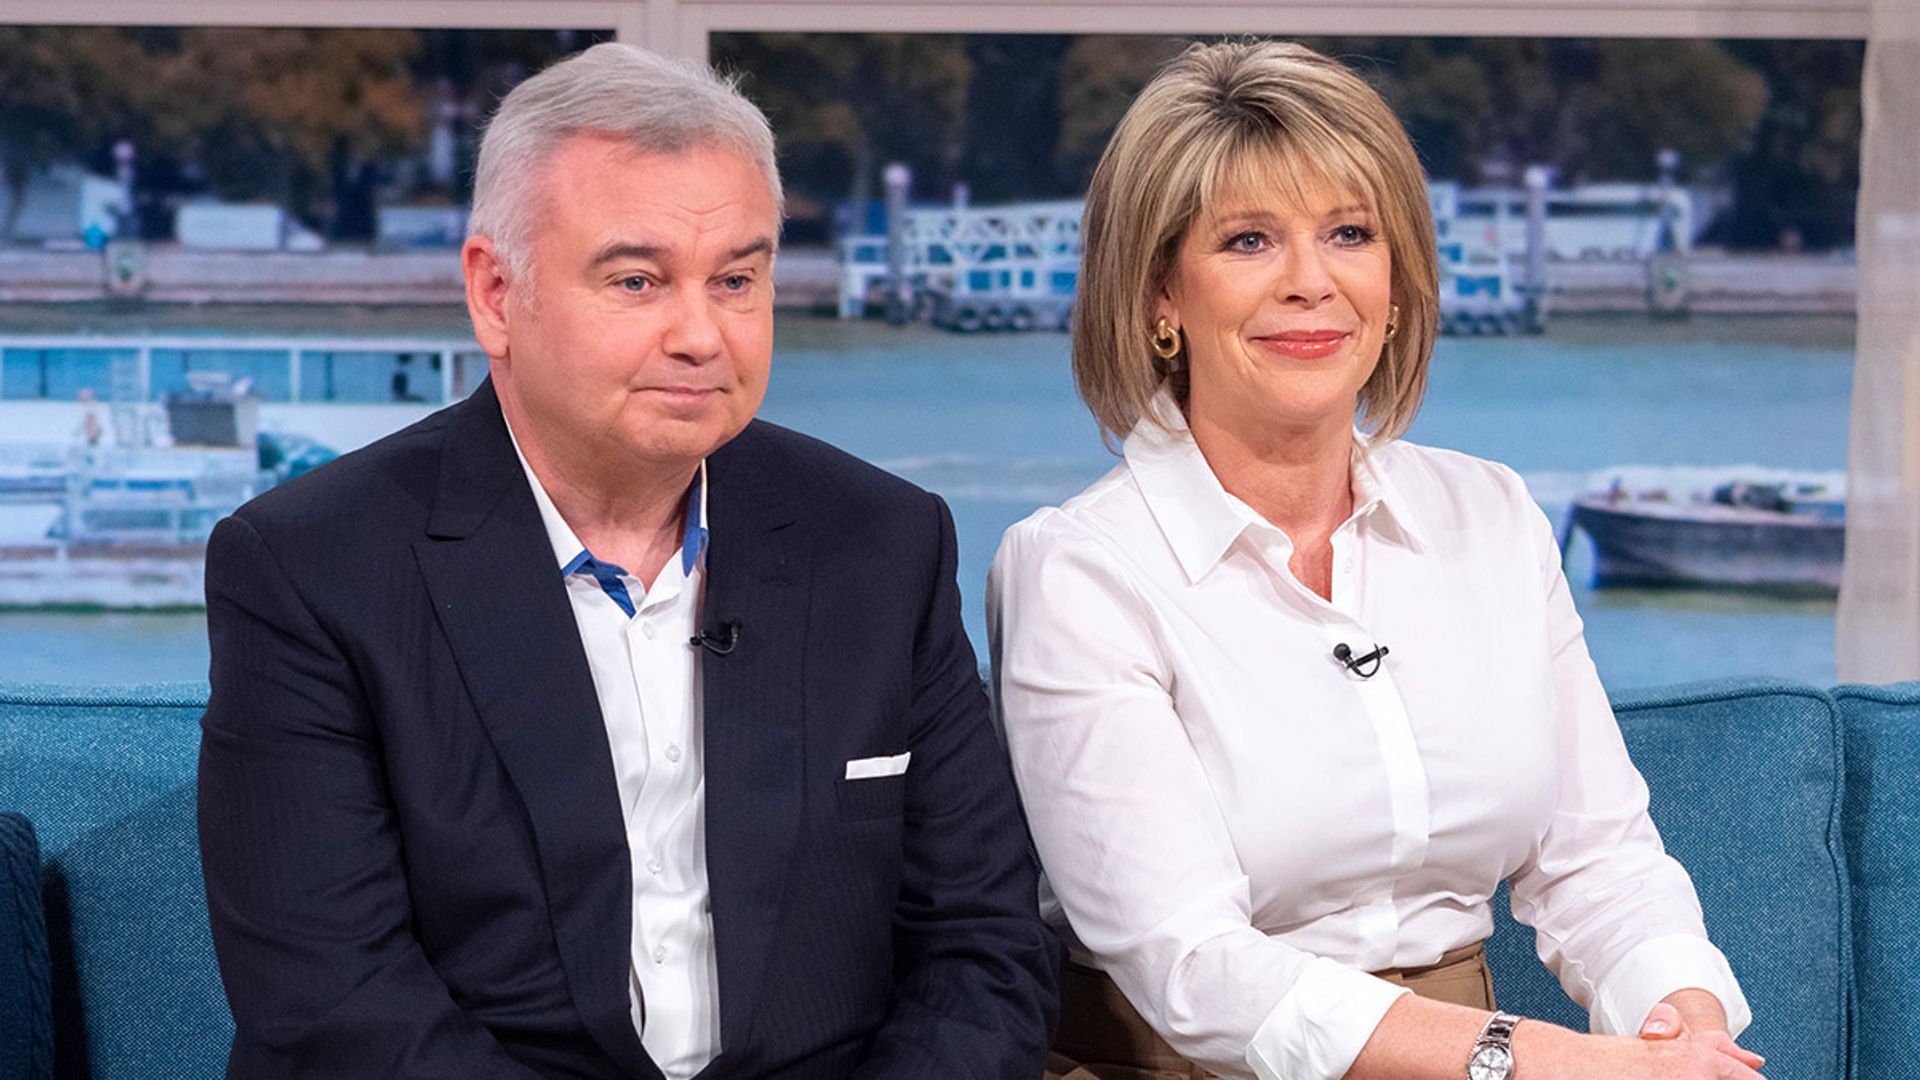 Eamonn Holmes says he and wife Ruth Langsford have a 'difficult' Christmas ahead